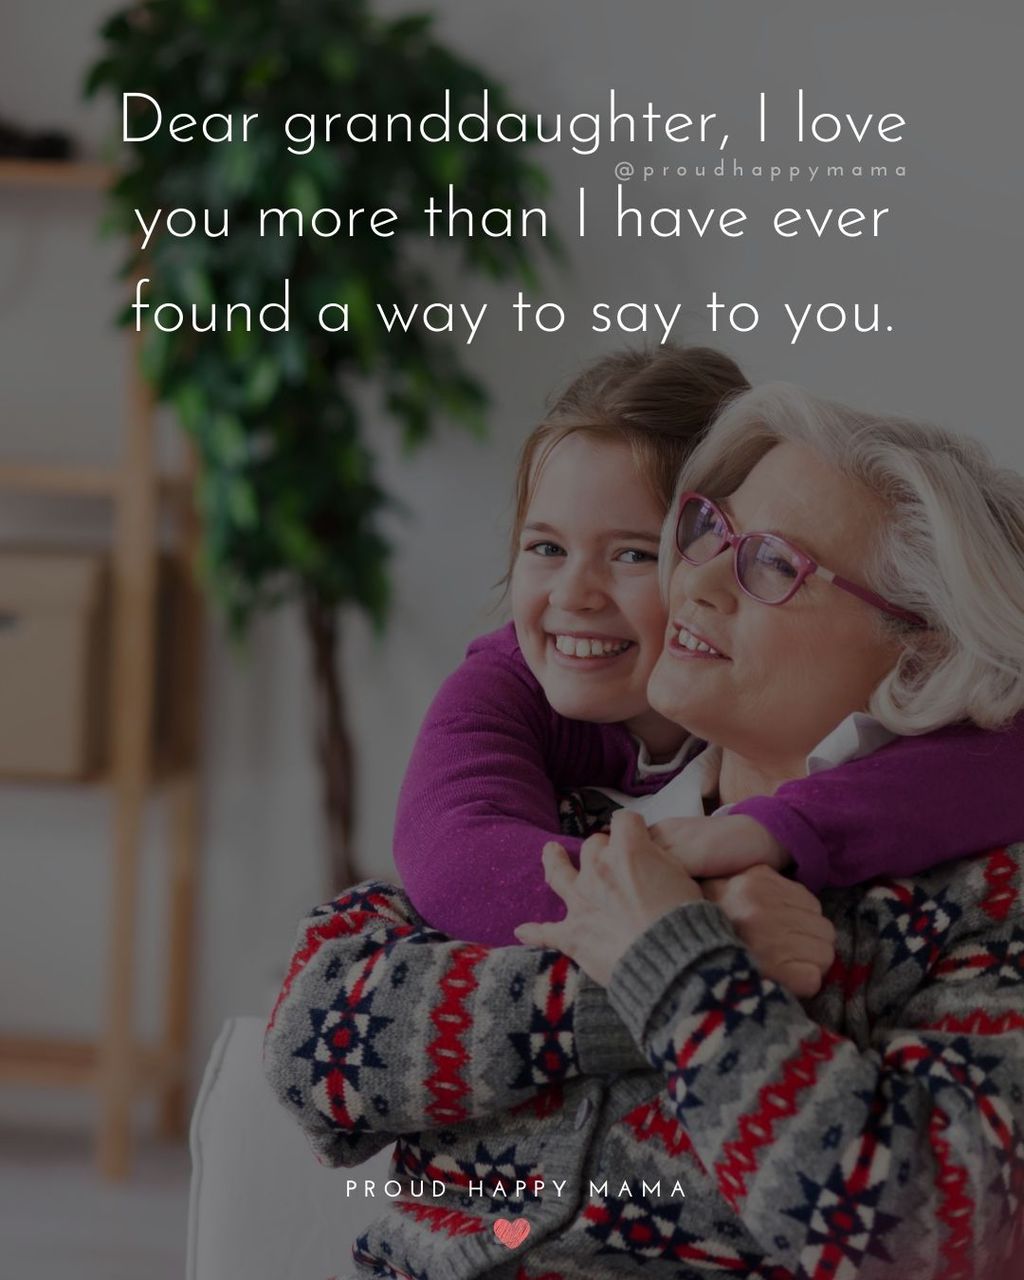 Granddaughter Quotes - Dear granddaughter, I love you more than I have ever found a way to say to you.